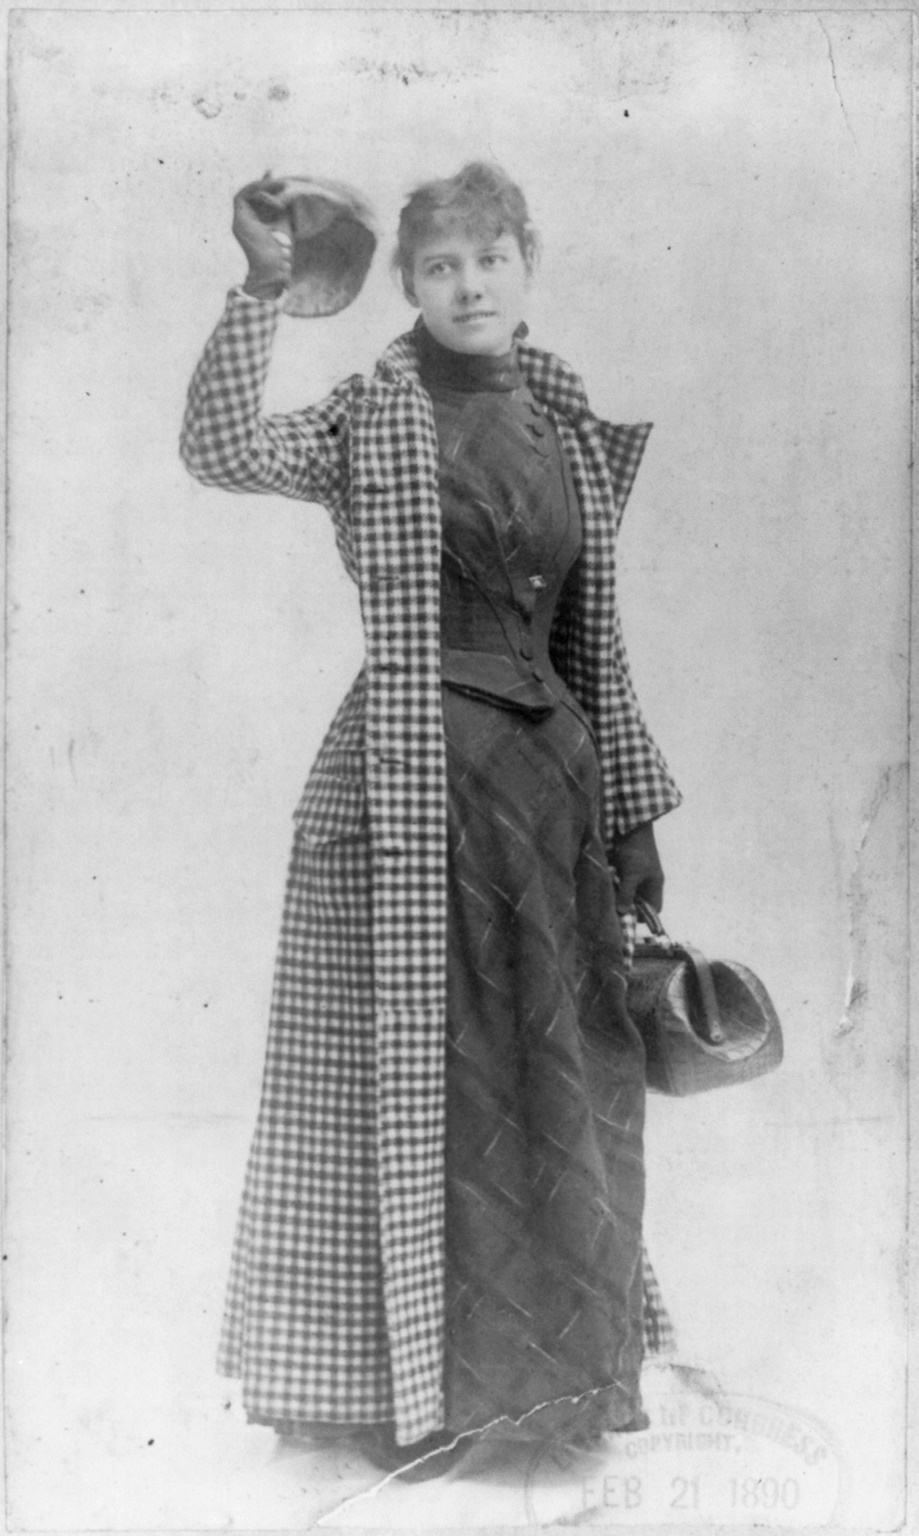 Nellie Bly in her legendary travel attire with her dress visible